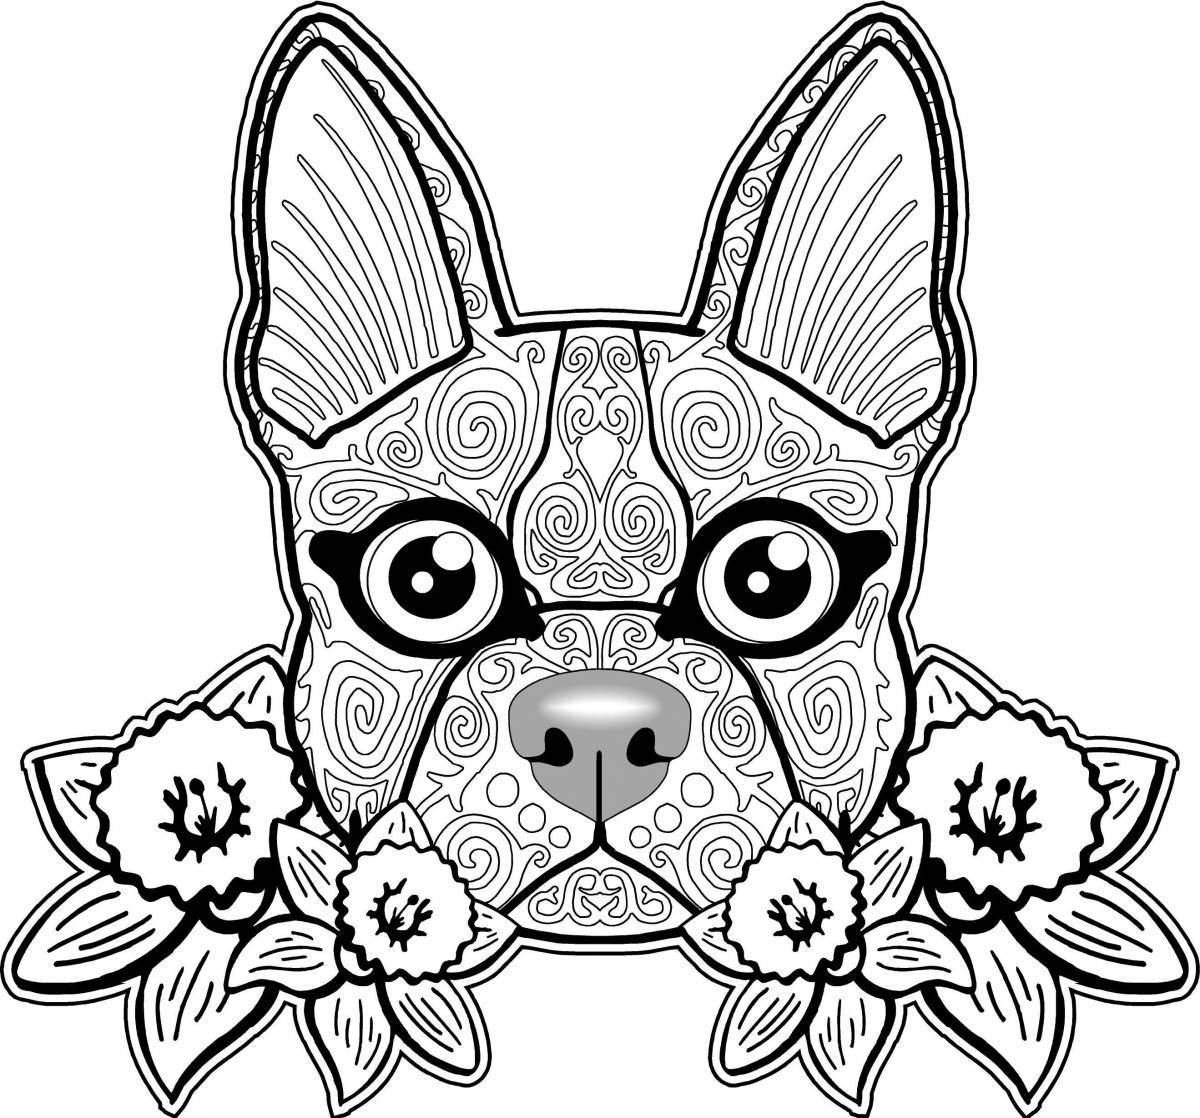 Colorful cat and dog coloring pages for kids